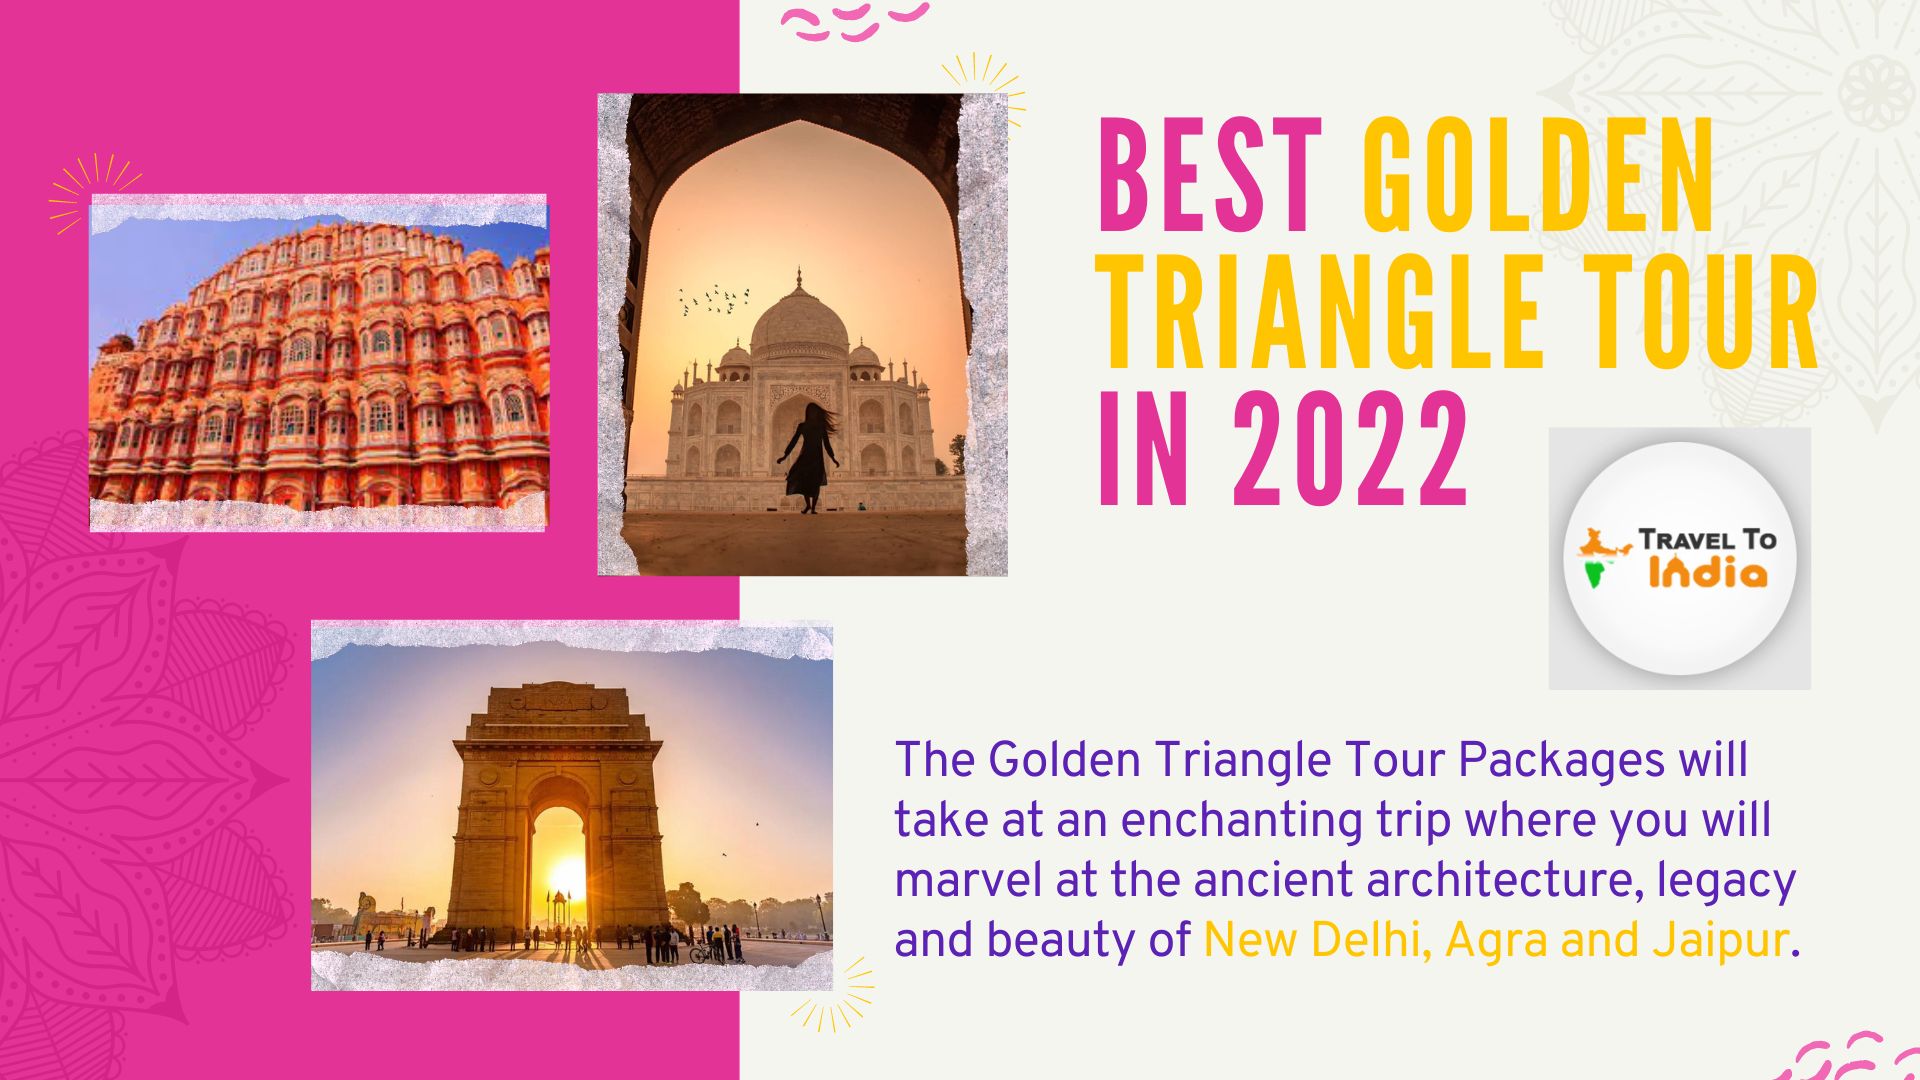 Best Golden Triangle Tour in 2022-27ad2cfe